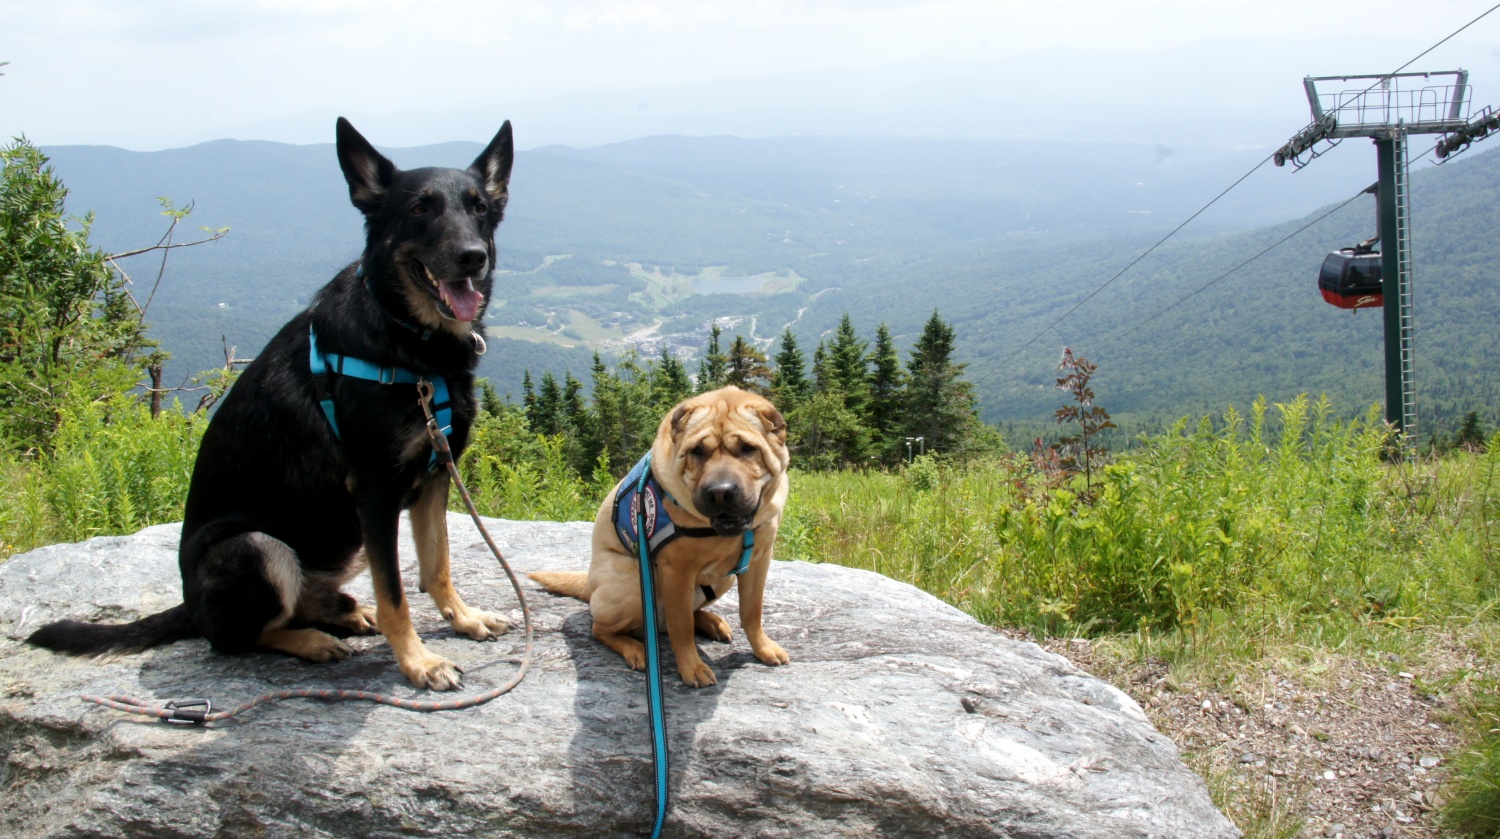 Black German shepherd and tan Shar-pei dogs at the top of the pet friendly Gondola Ride in Stowe, VT